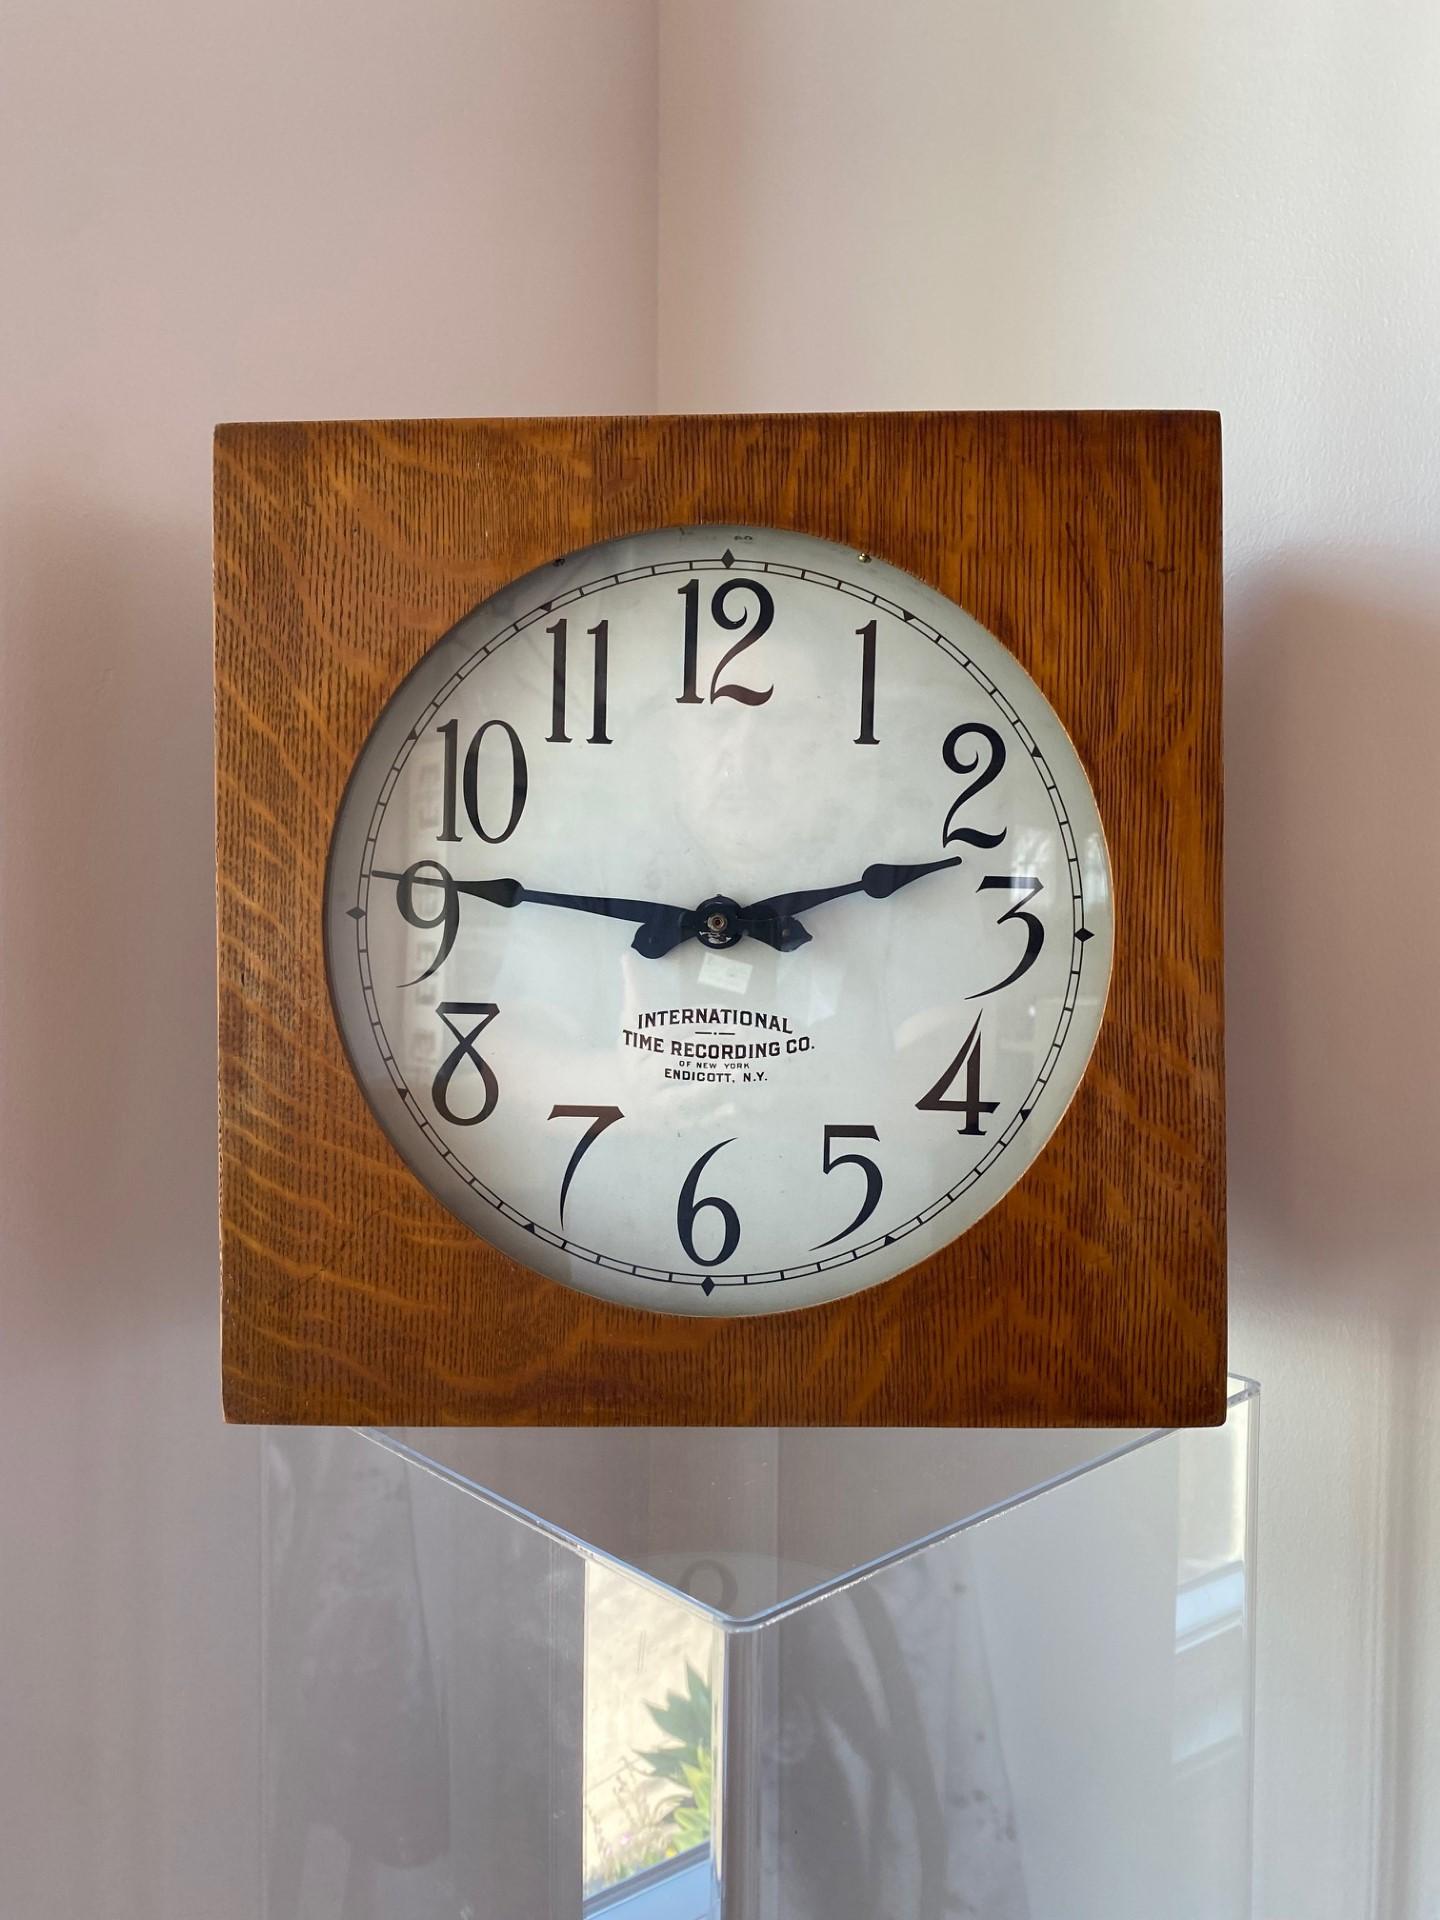 Antique Industrial Clock from the International Time Recording Company 1920’s For Sale 2